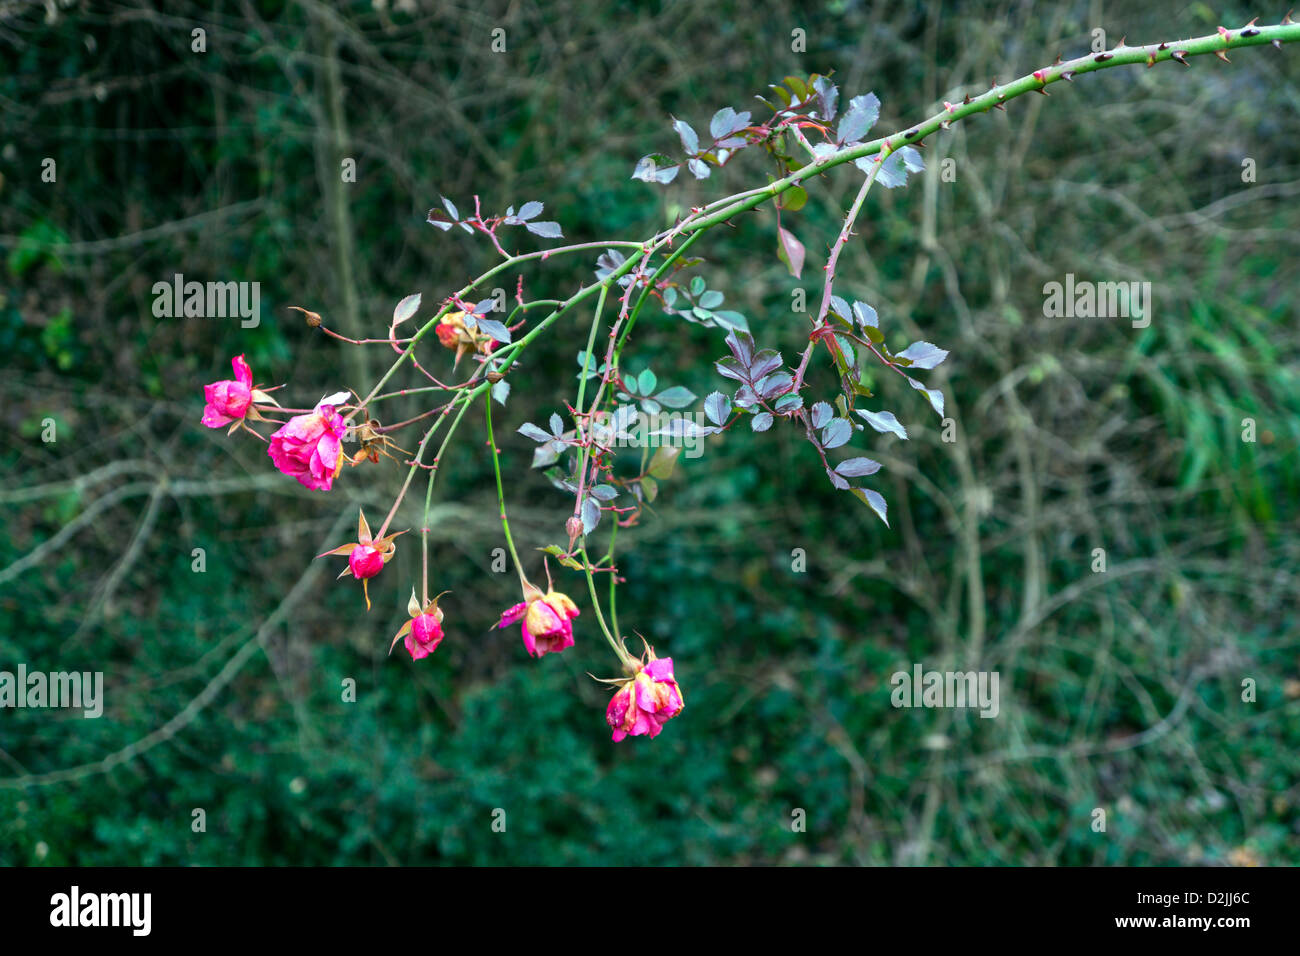 Fading wild pink roses on thorny stem Stock Photo